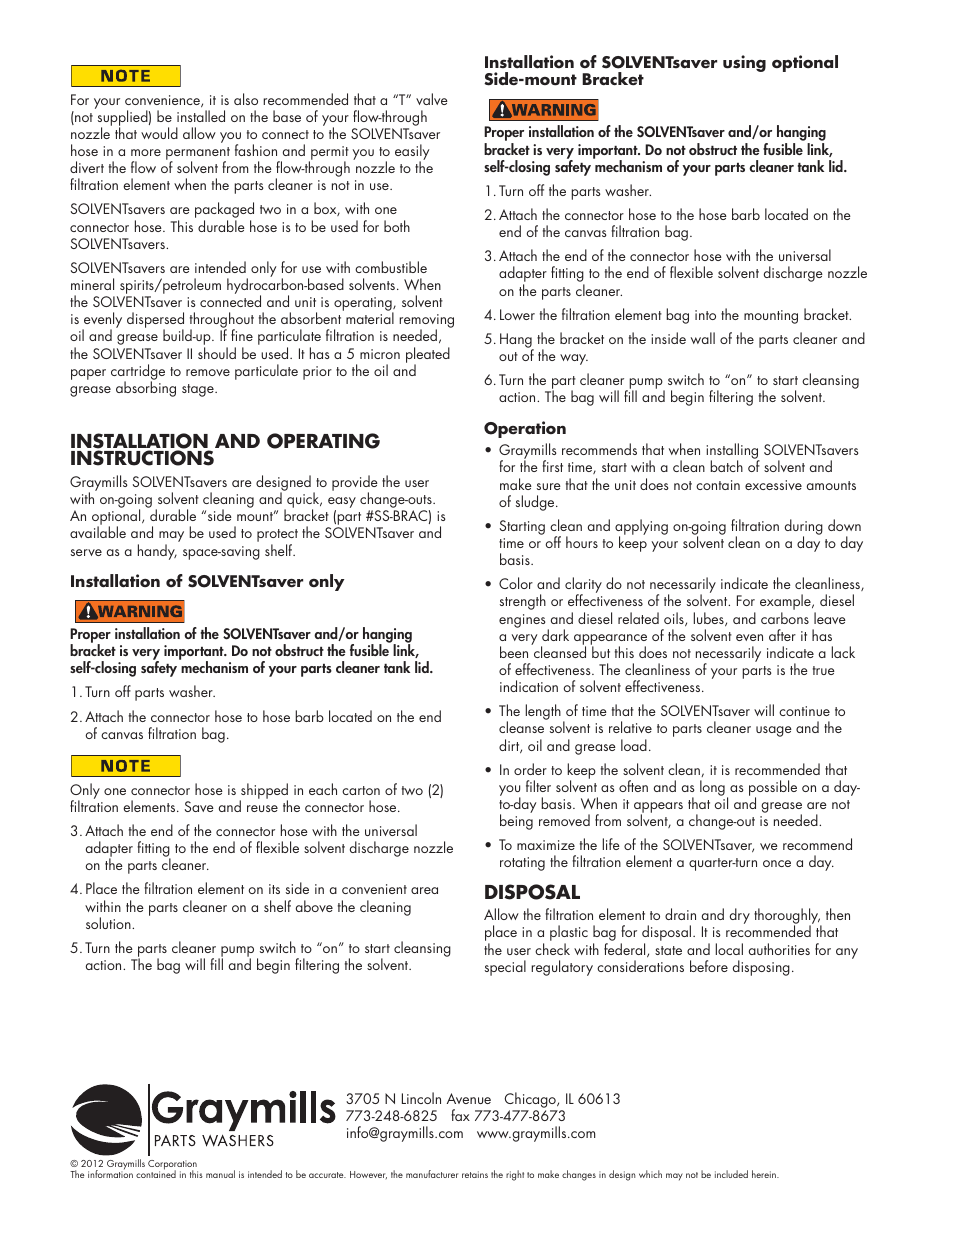 Installation and operating instructions, Disposal | Graymills Solvent Saver User Manual | Page 2 / 2